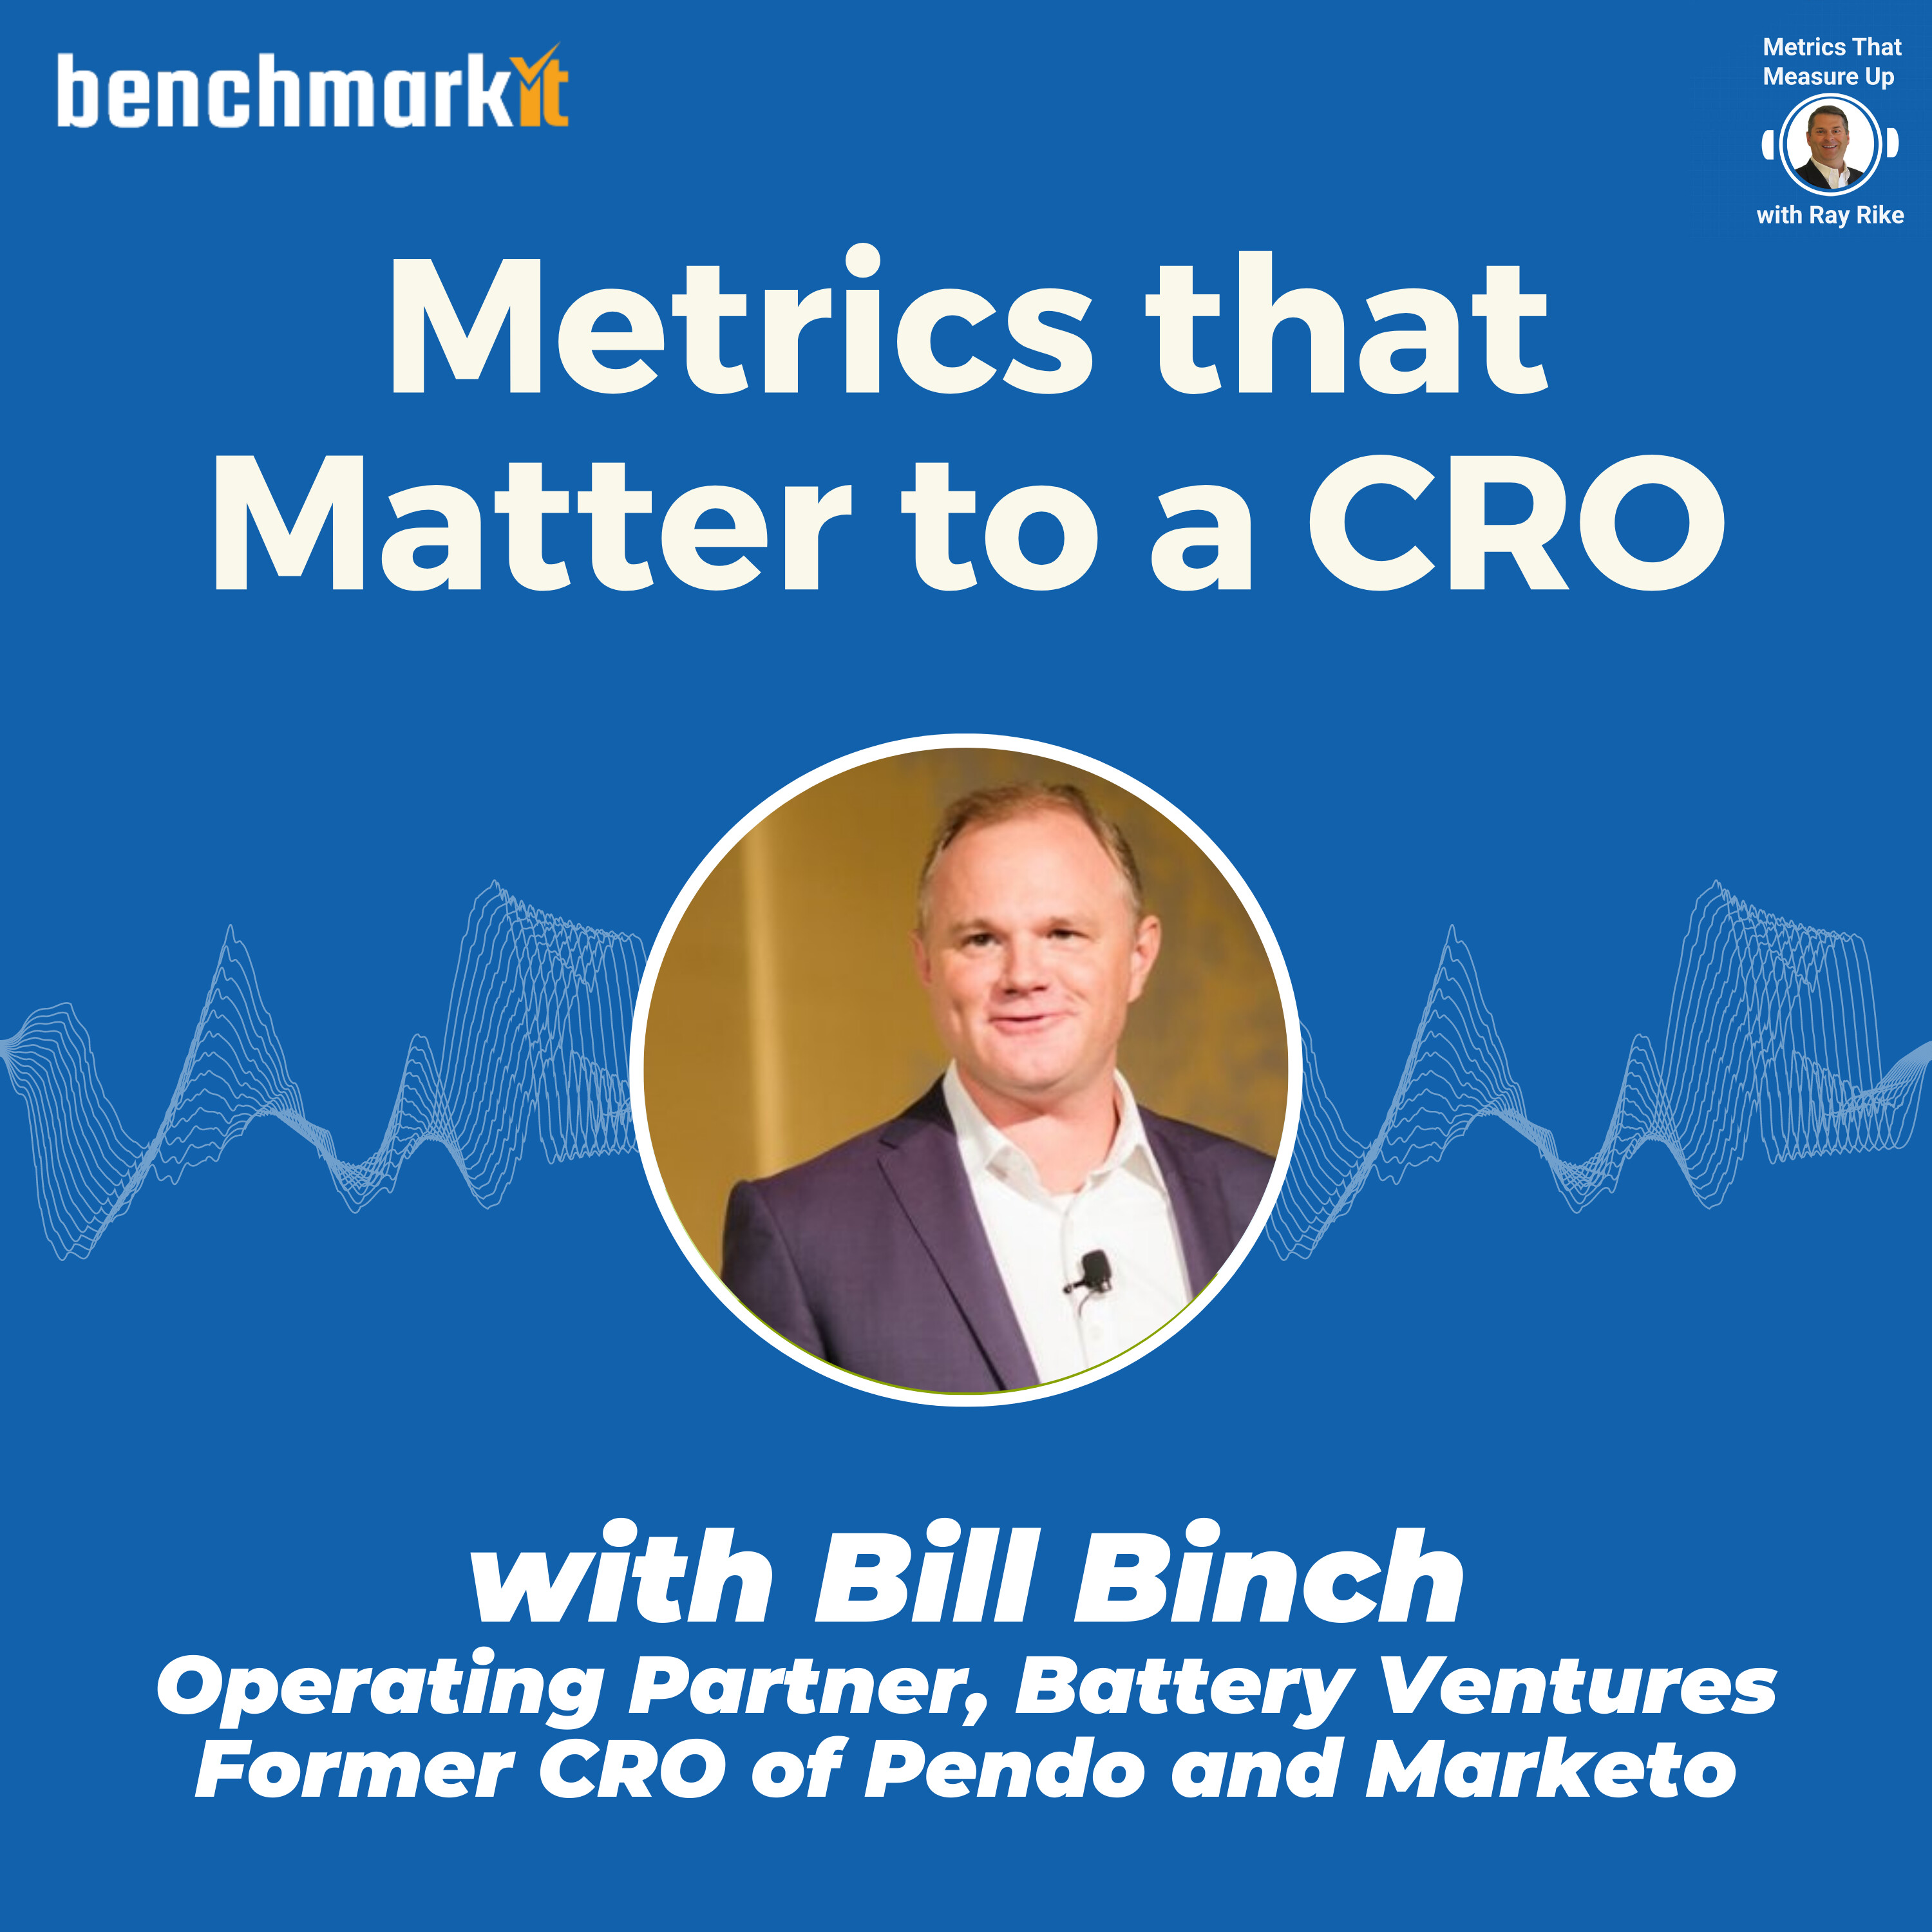 Metrics that Matter to a CRO - with Bill Binch, Operating Partner at Battery Ventures